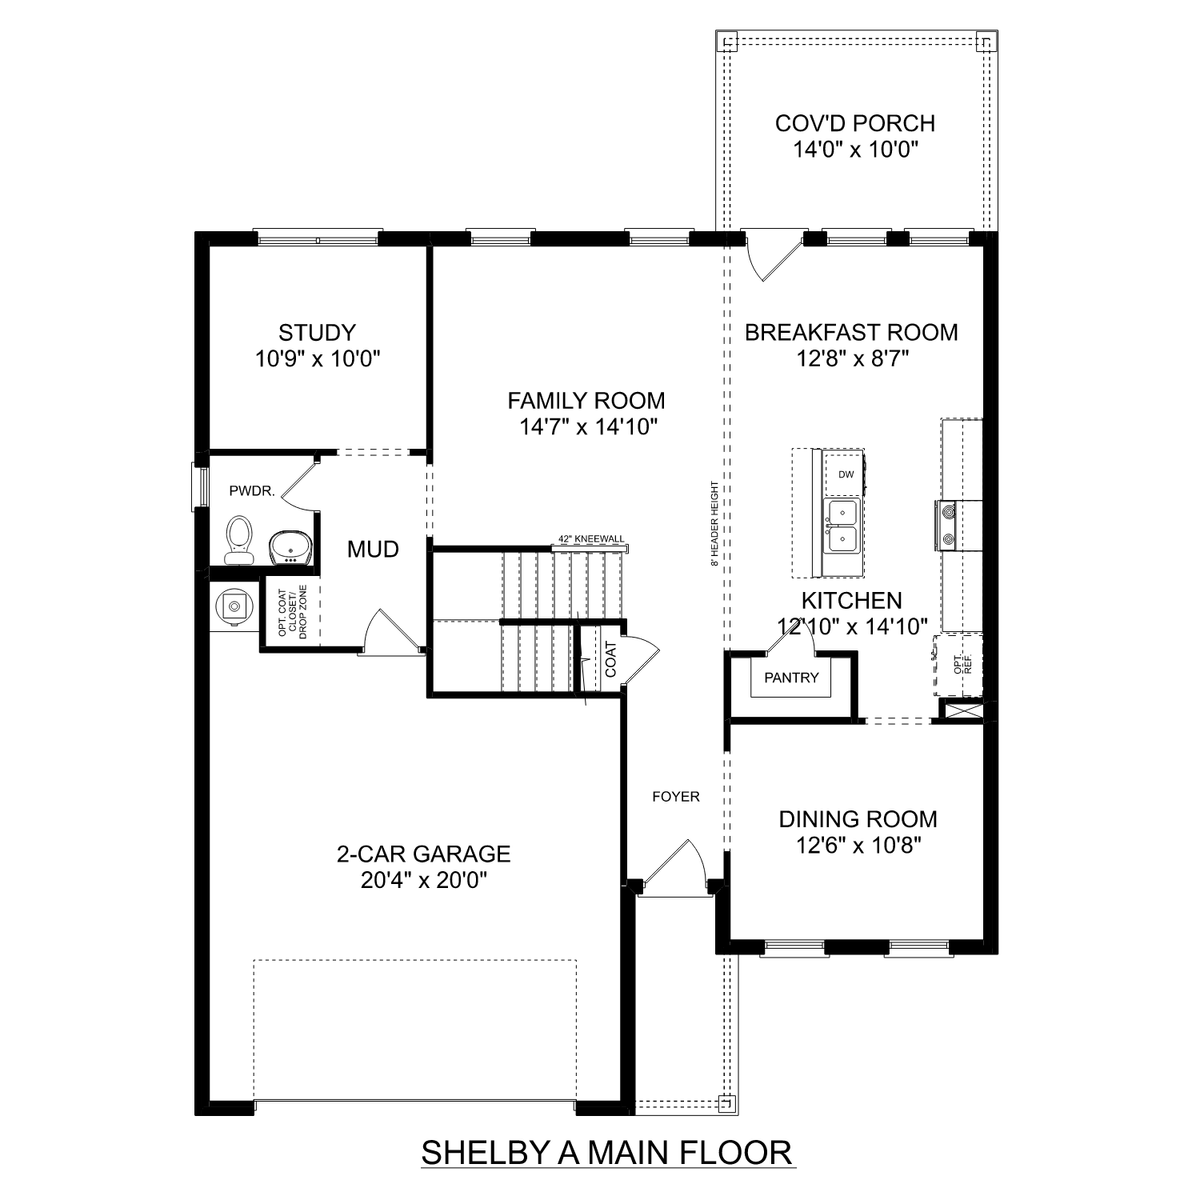 1 - The Shelby A buildable floor plan layout in Davidson Homes' Clearview community.